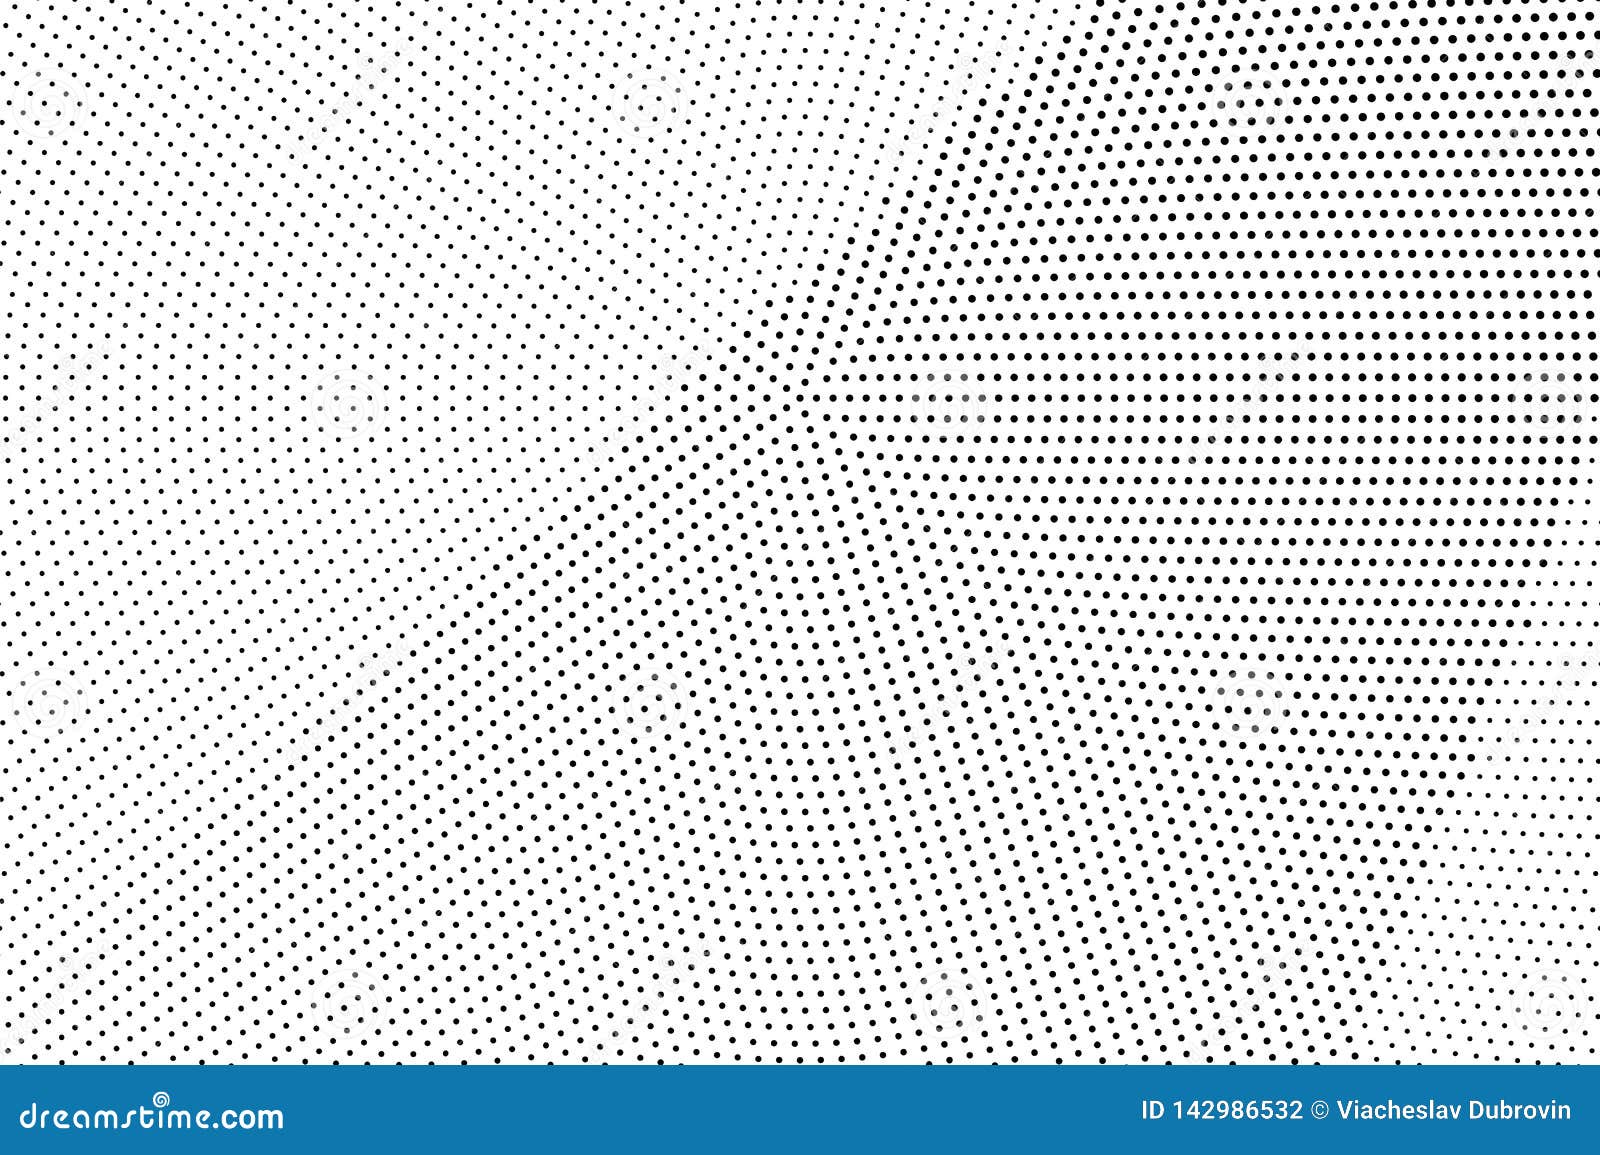 Black and White Halftone Vector Background. Diagonal Gradient on Rough ...